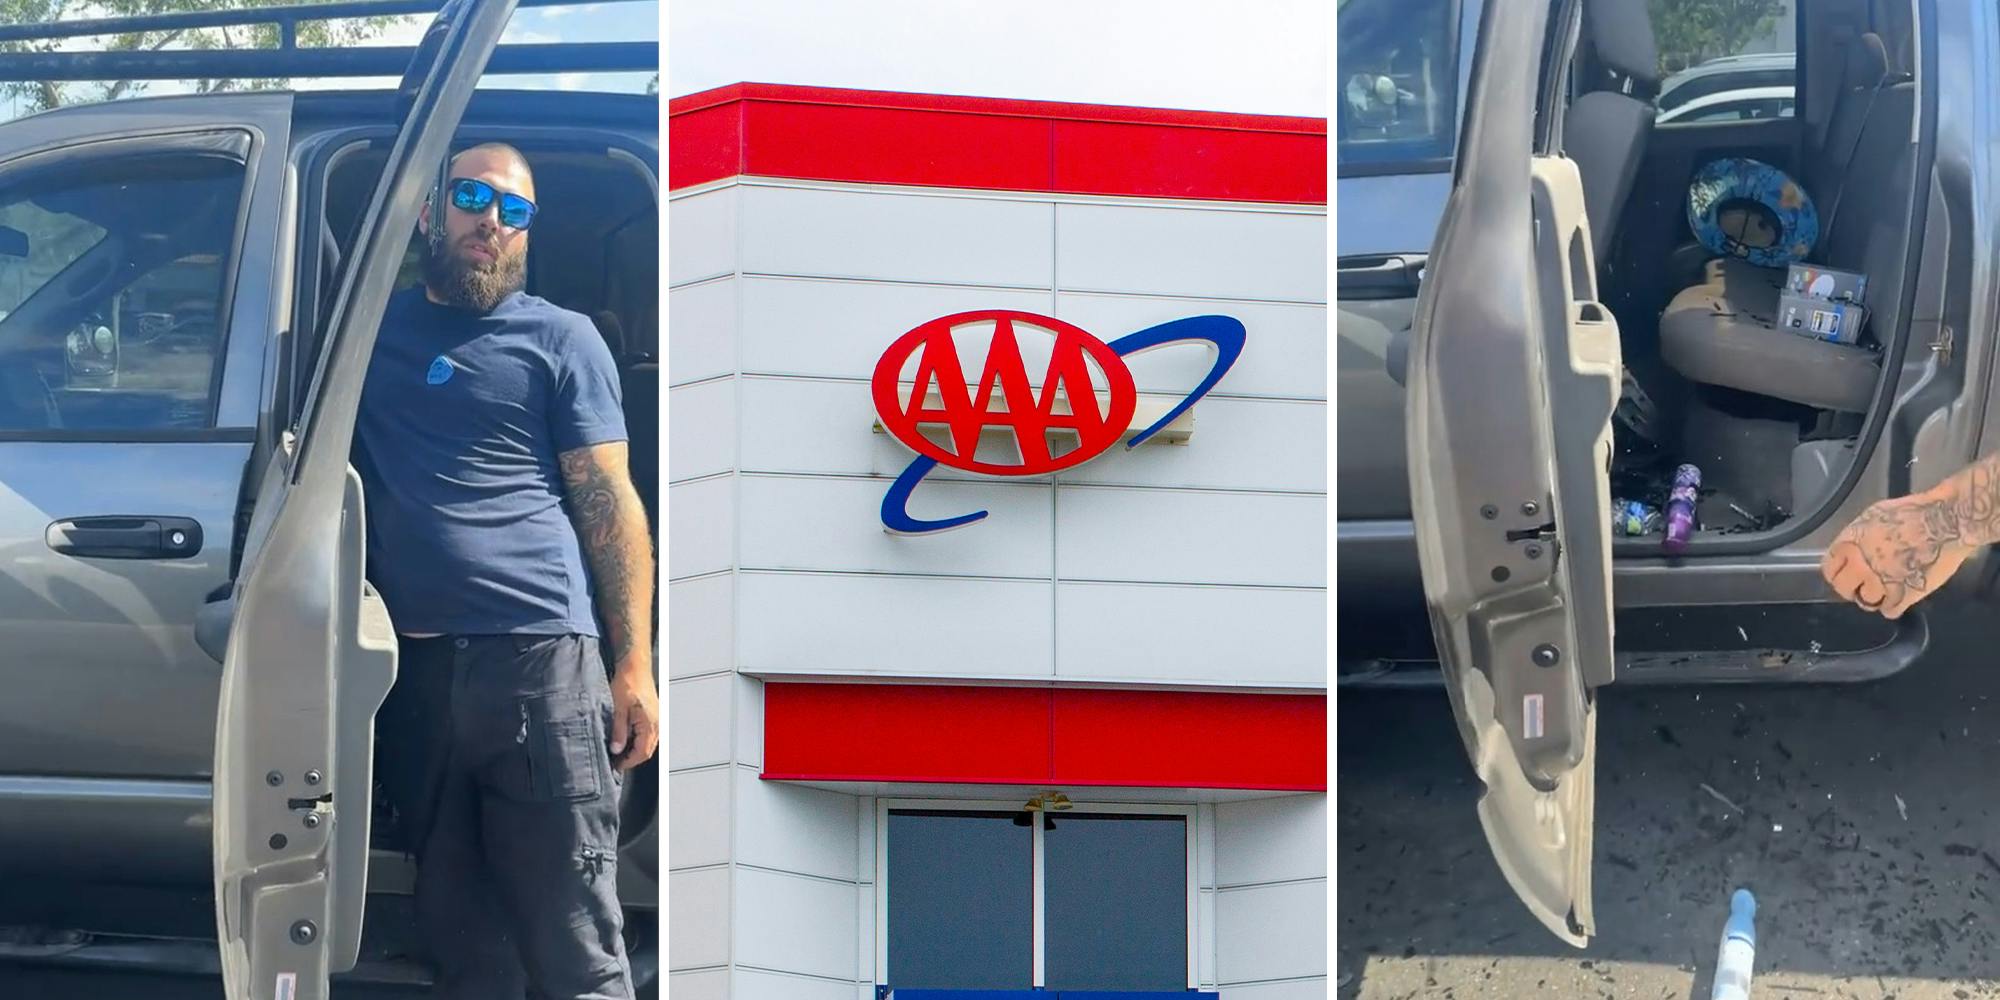 Man gets sick of waiting for AAA to unlock car door, does something shocking instead